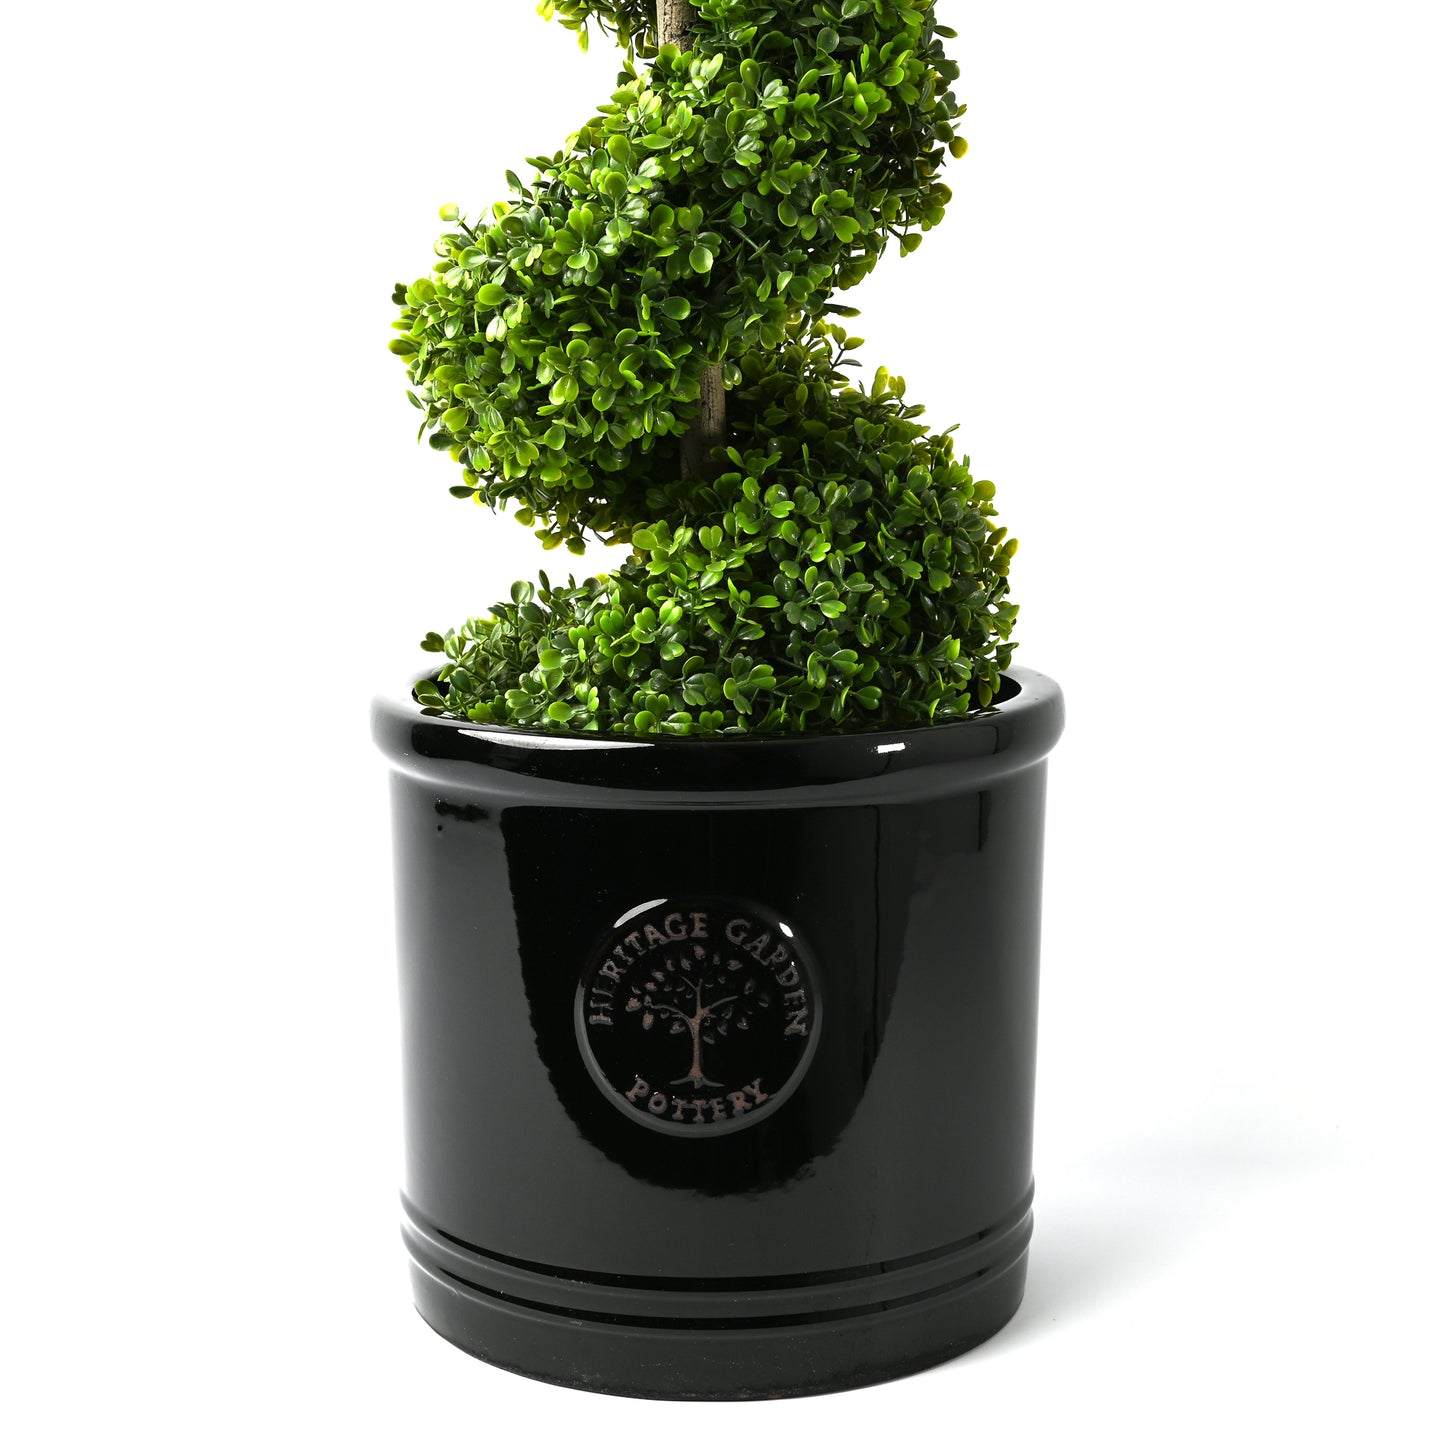 Large Outdoor Pot with topiary tree